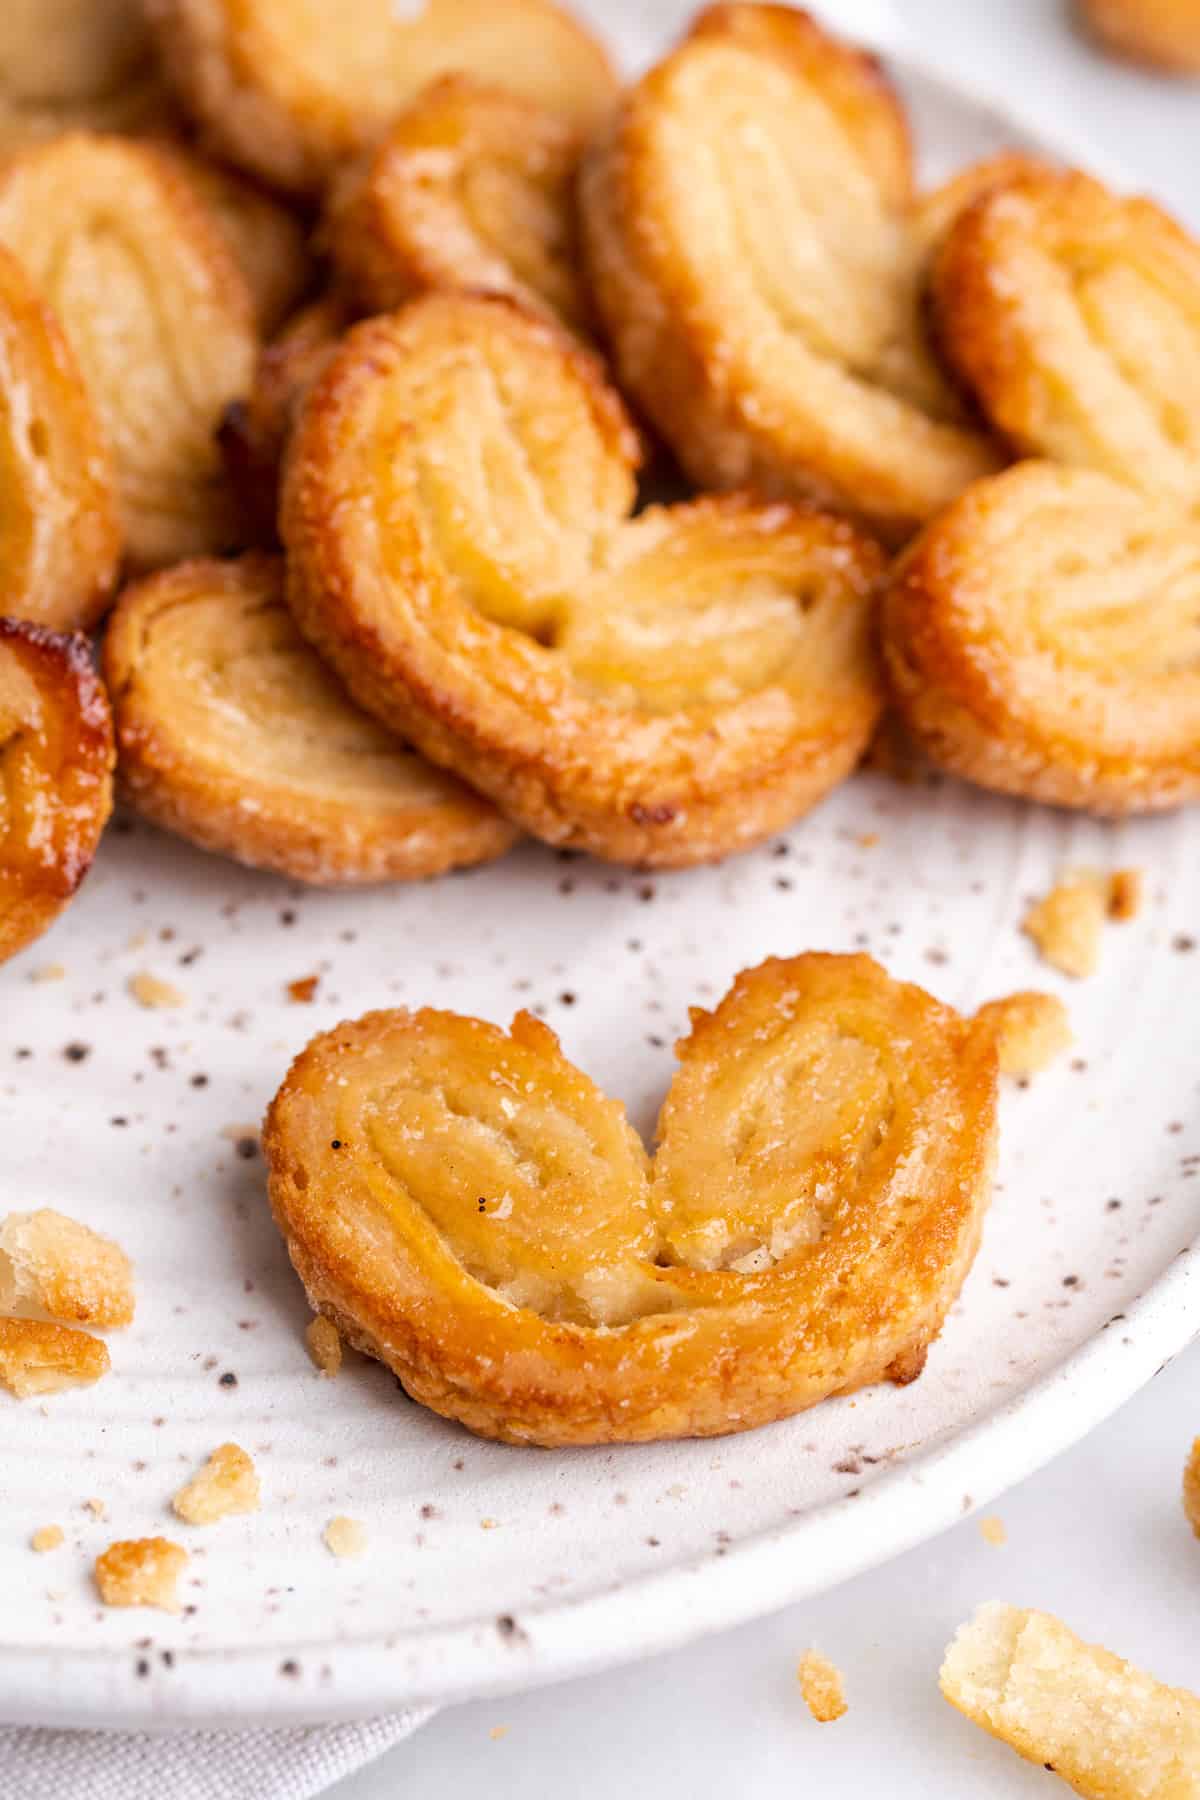 Close up of a puff pastry palmier on a plate, with a pile of palmiers behind it